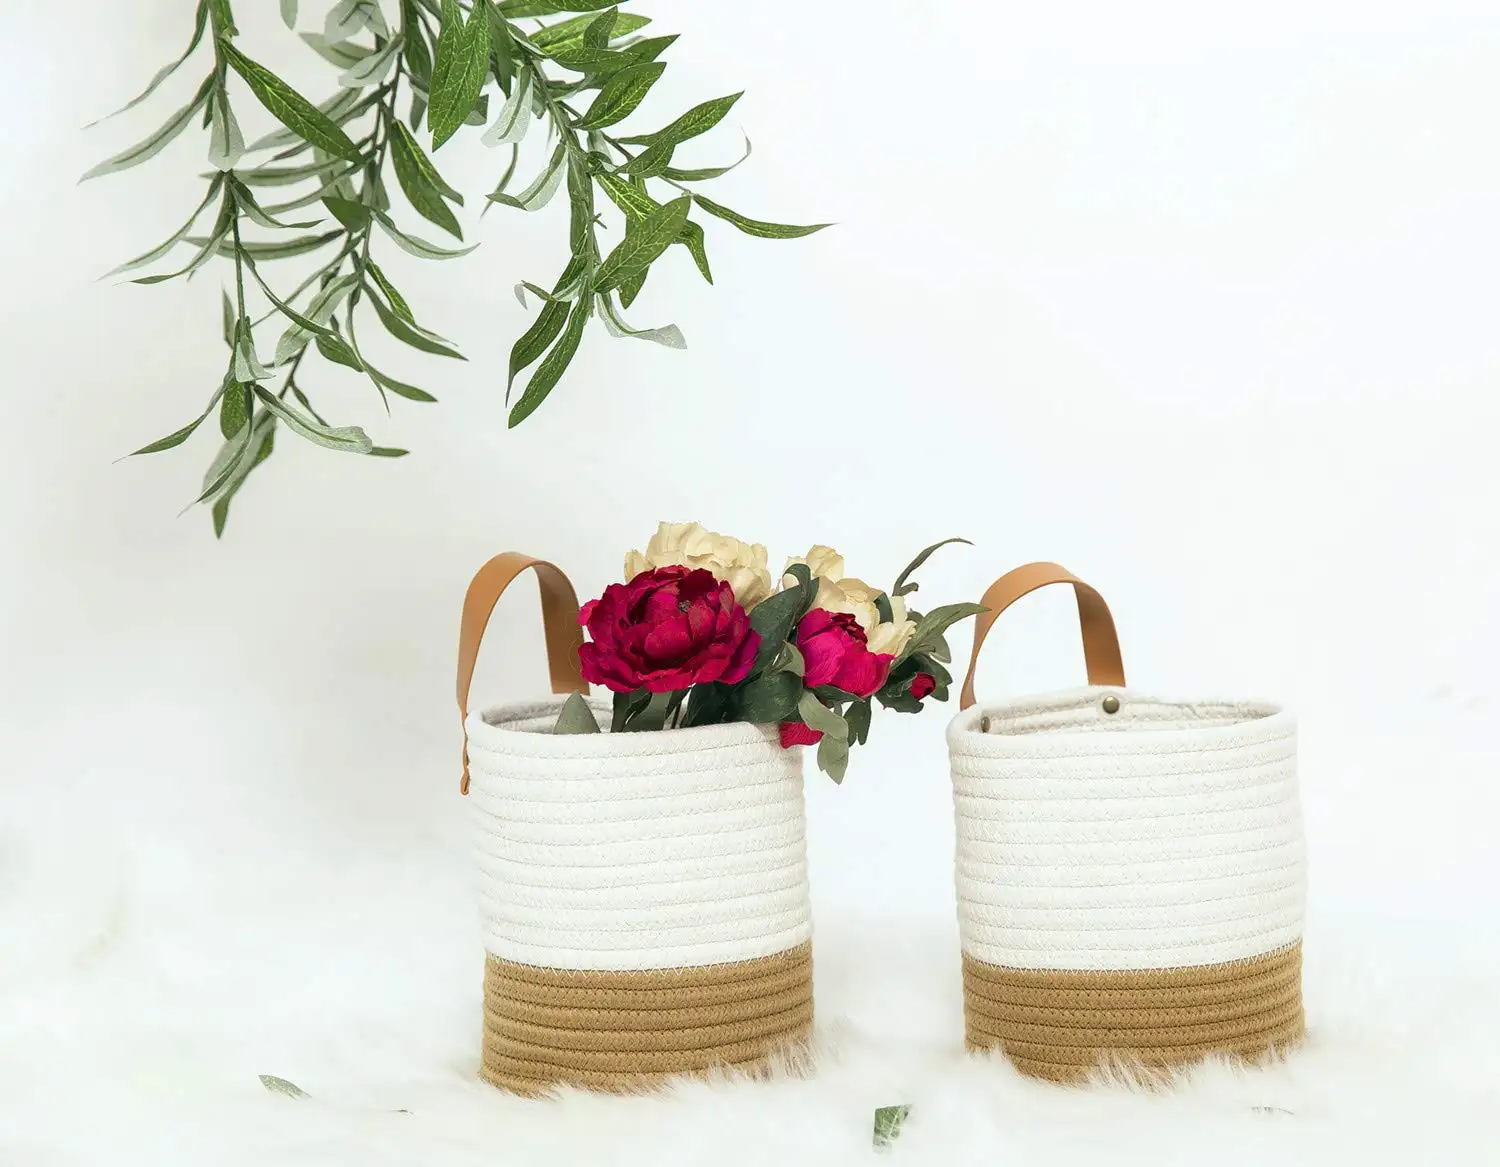 Storage Baskets With Rope Handles Wall Hanging Cotton Storage Baskets Small Rope Baskets With Leather Handle Door Closet Organizer Woven Baskets For Keys Wallet